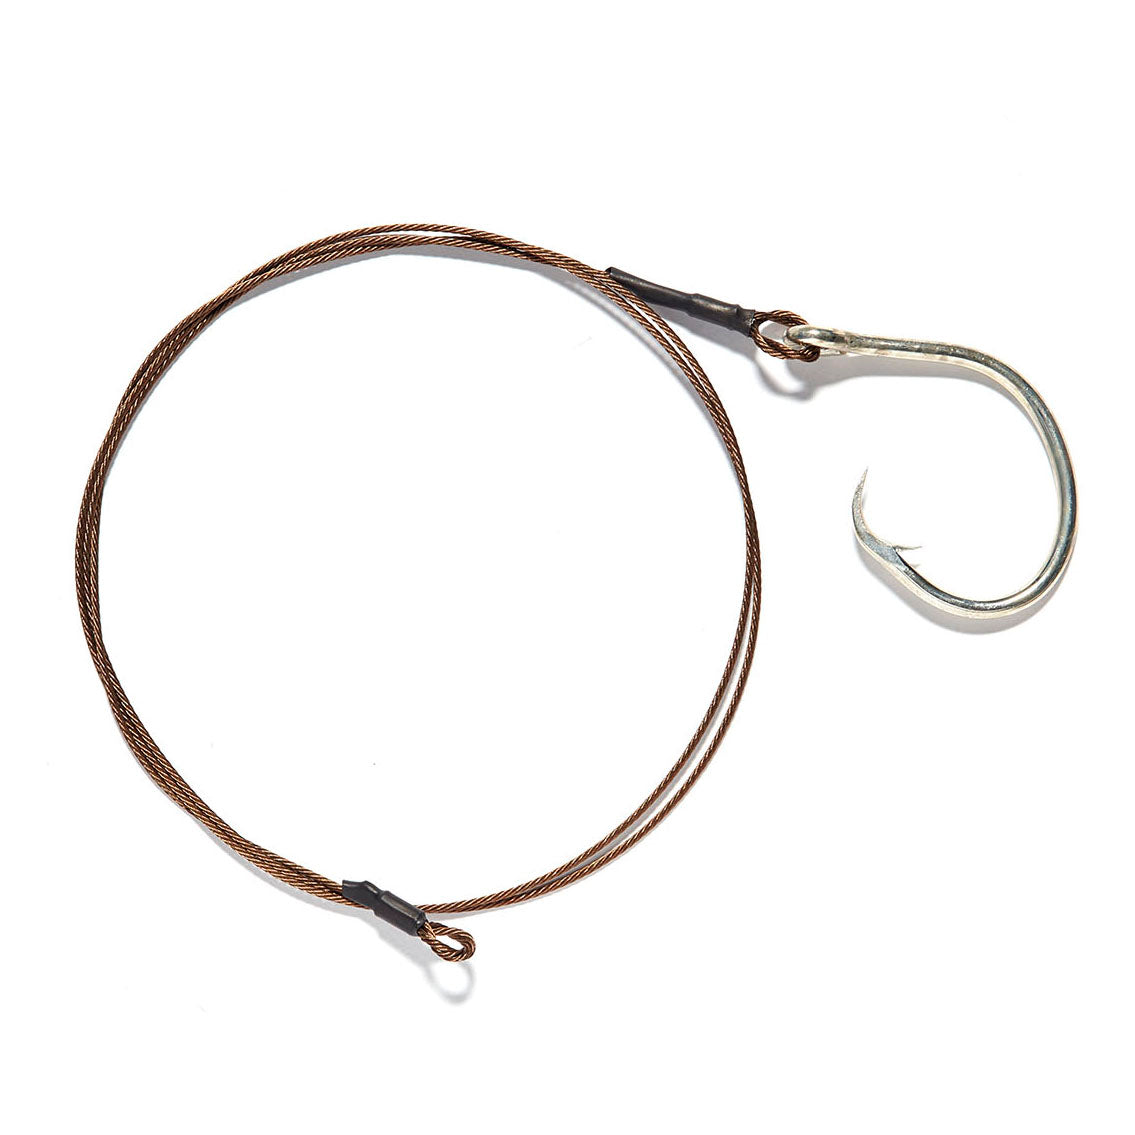 5' Braided 480lb Stainless Fishing Leader Mustad 39960 Inline Circle Hook